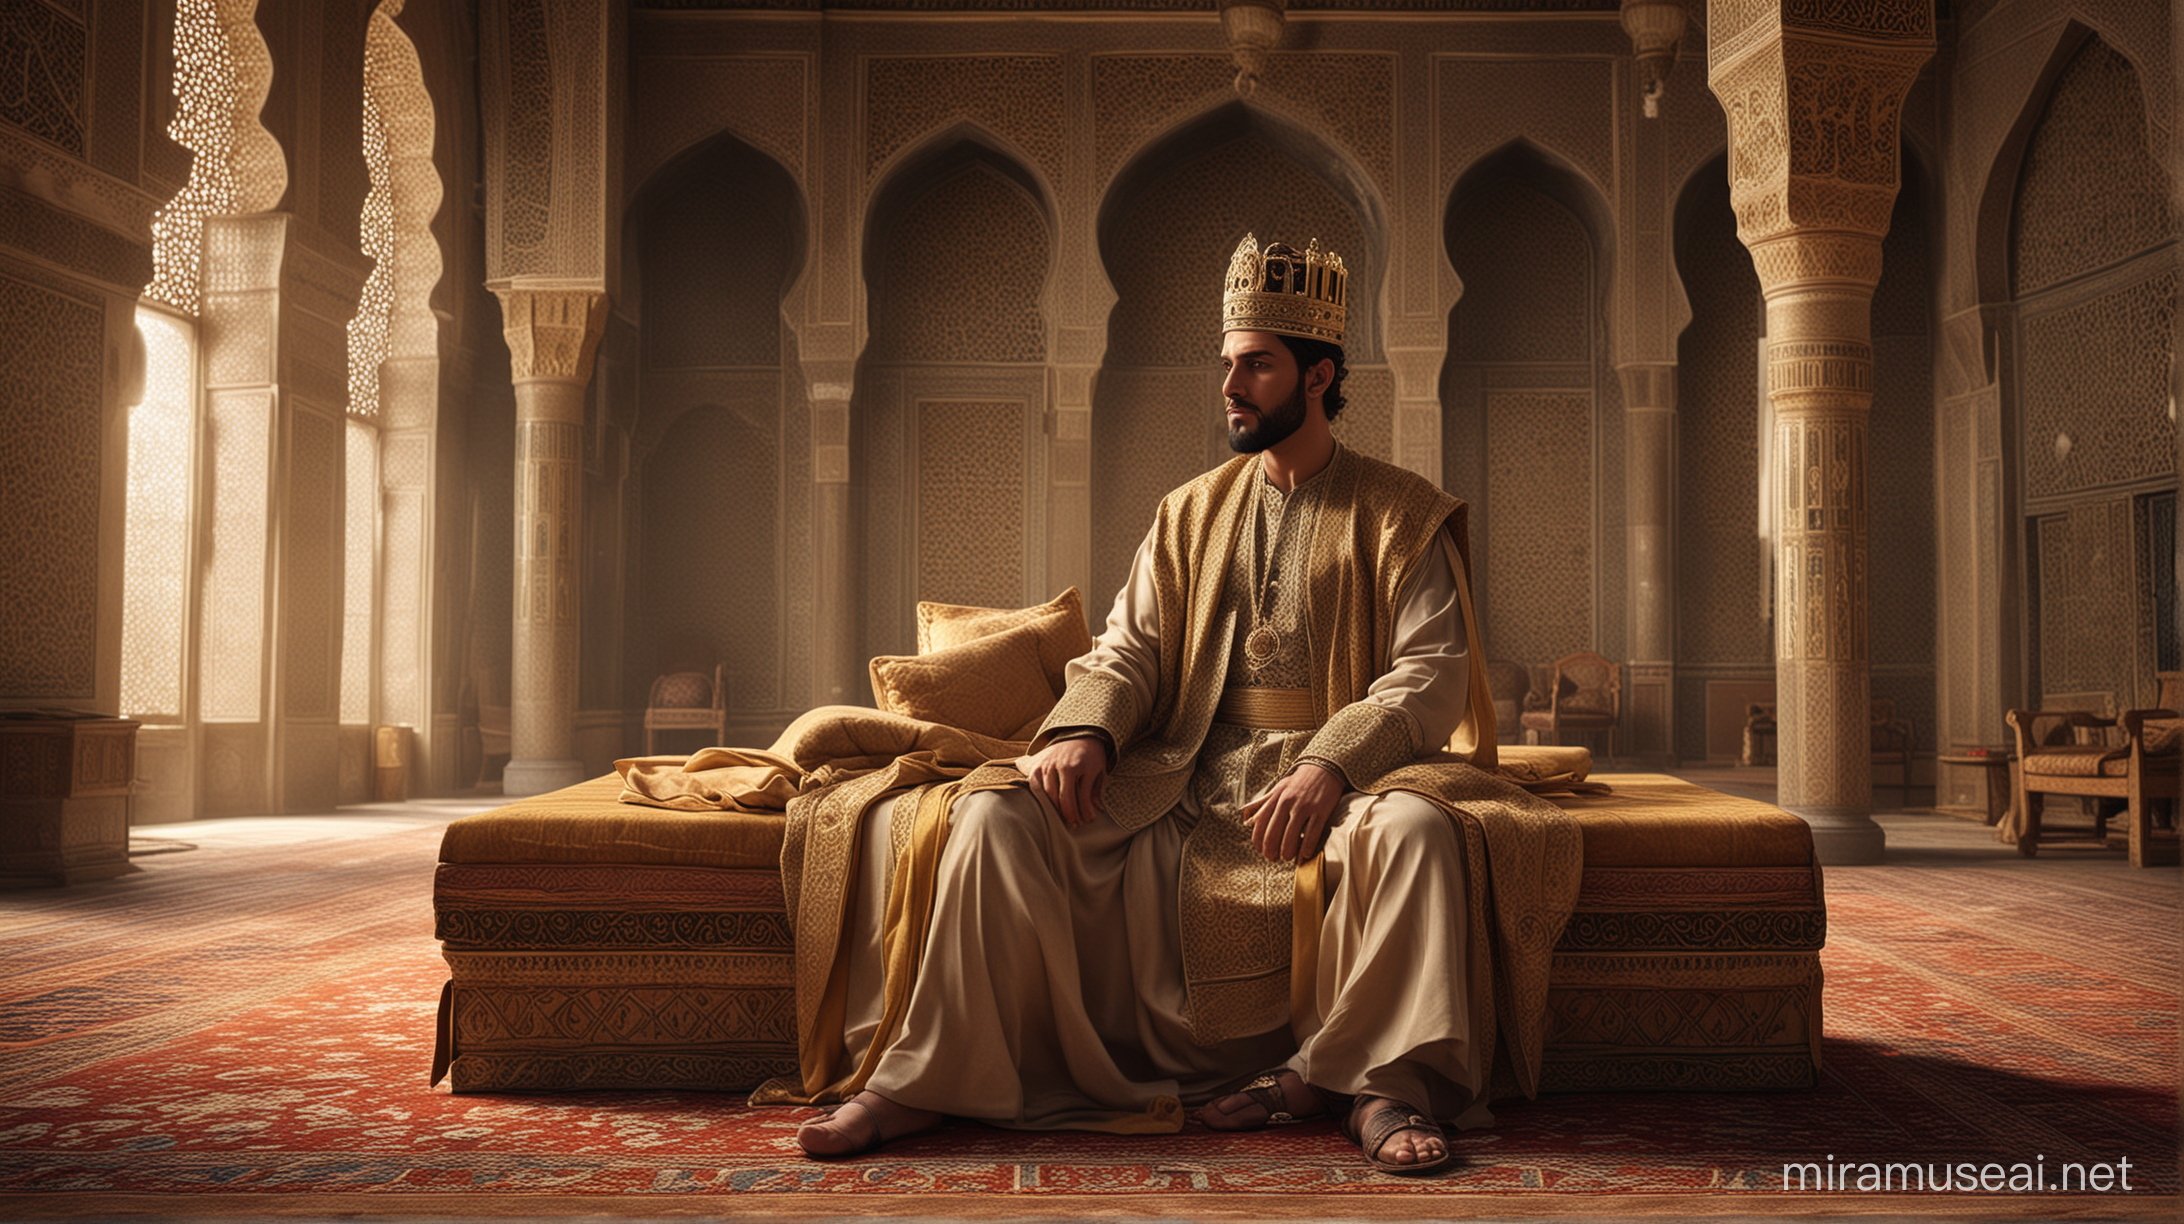 Create a very beautiful Muslim king sitting in his palace of a old time.